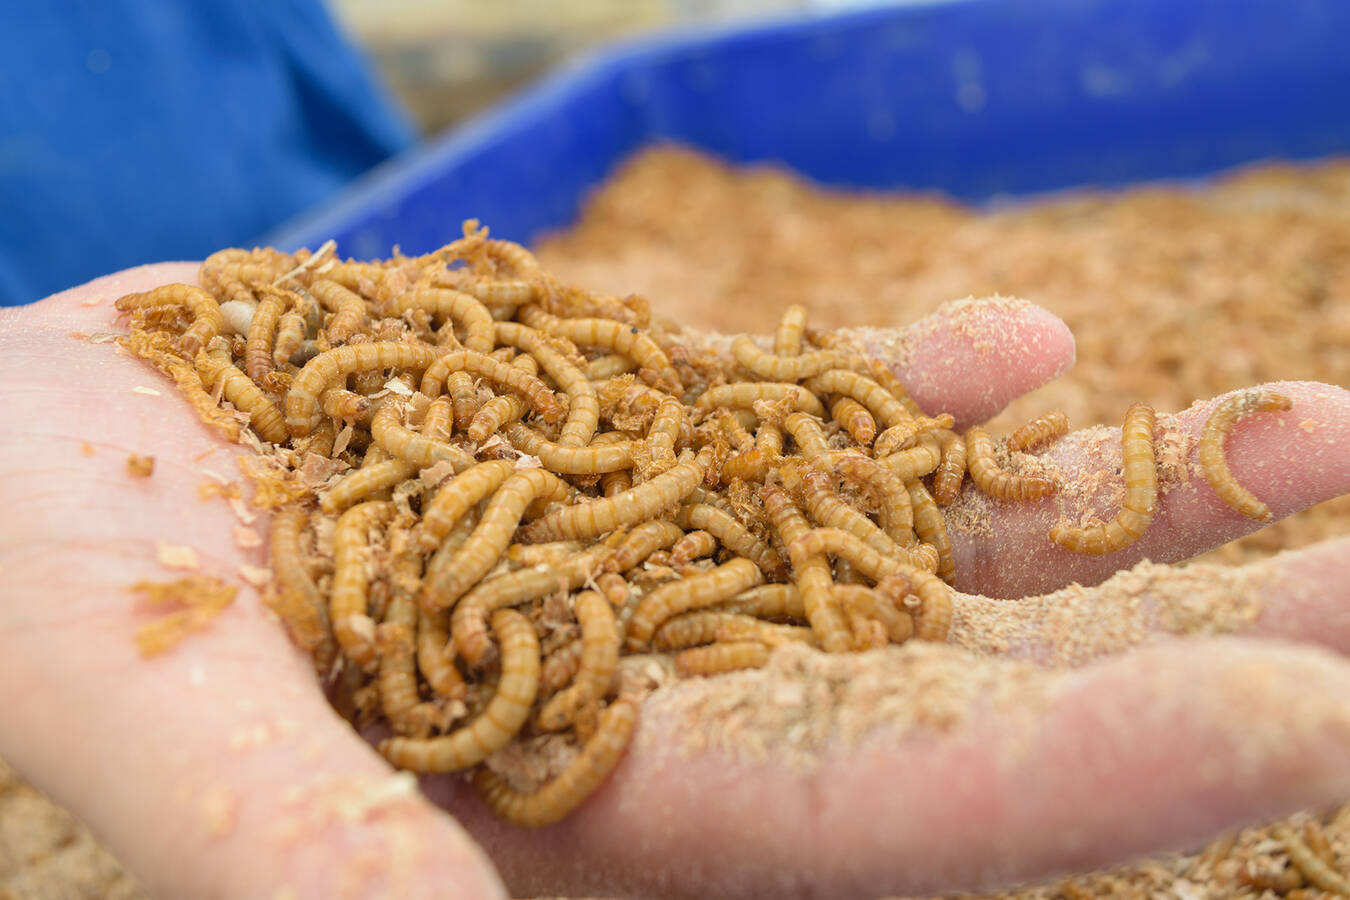 Mealworms have to undergo sieving